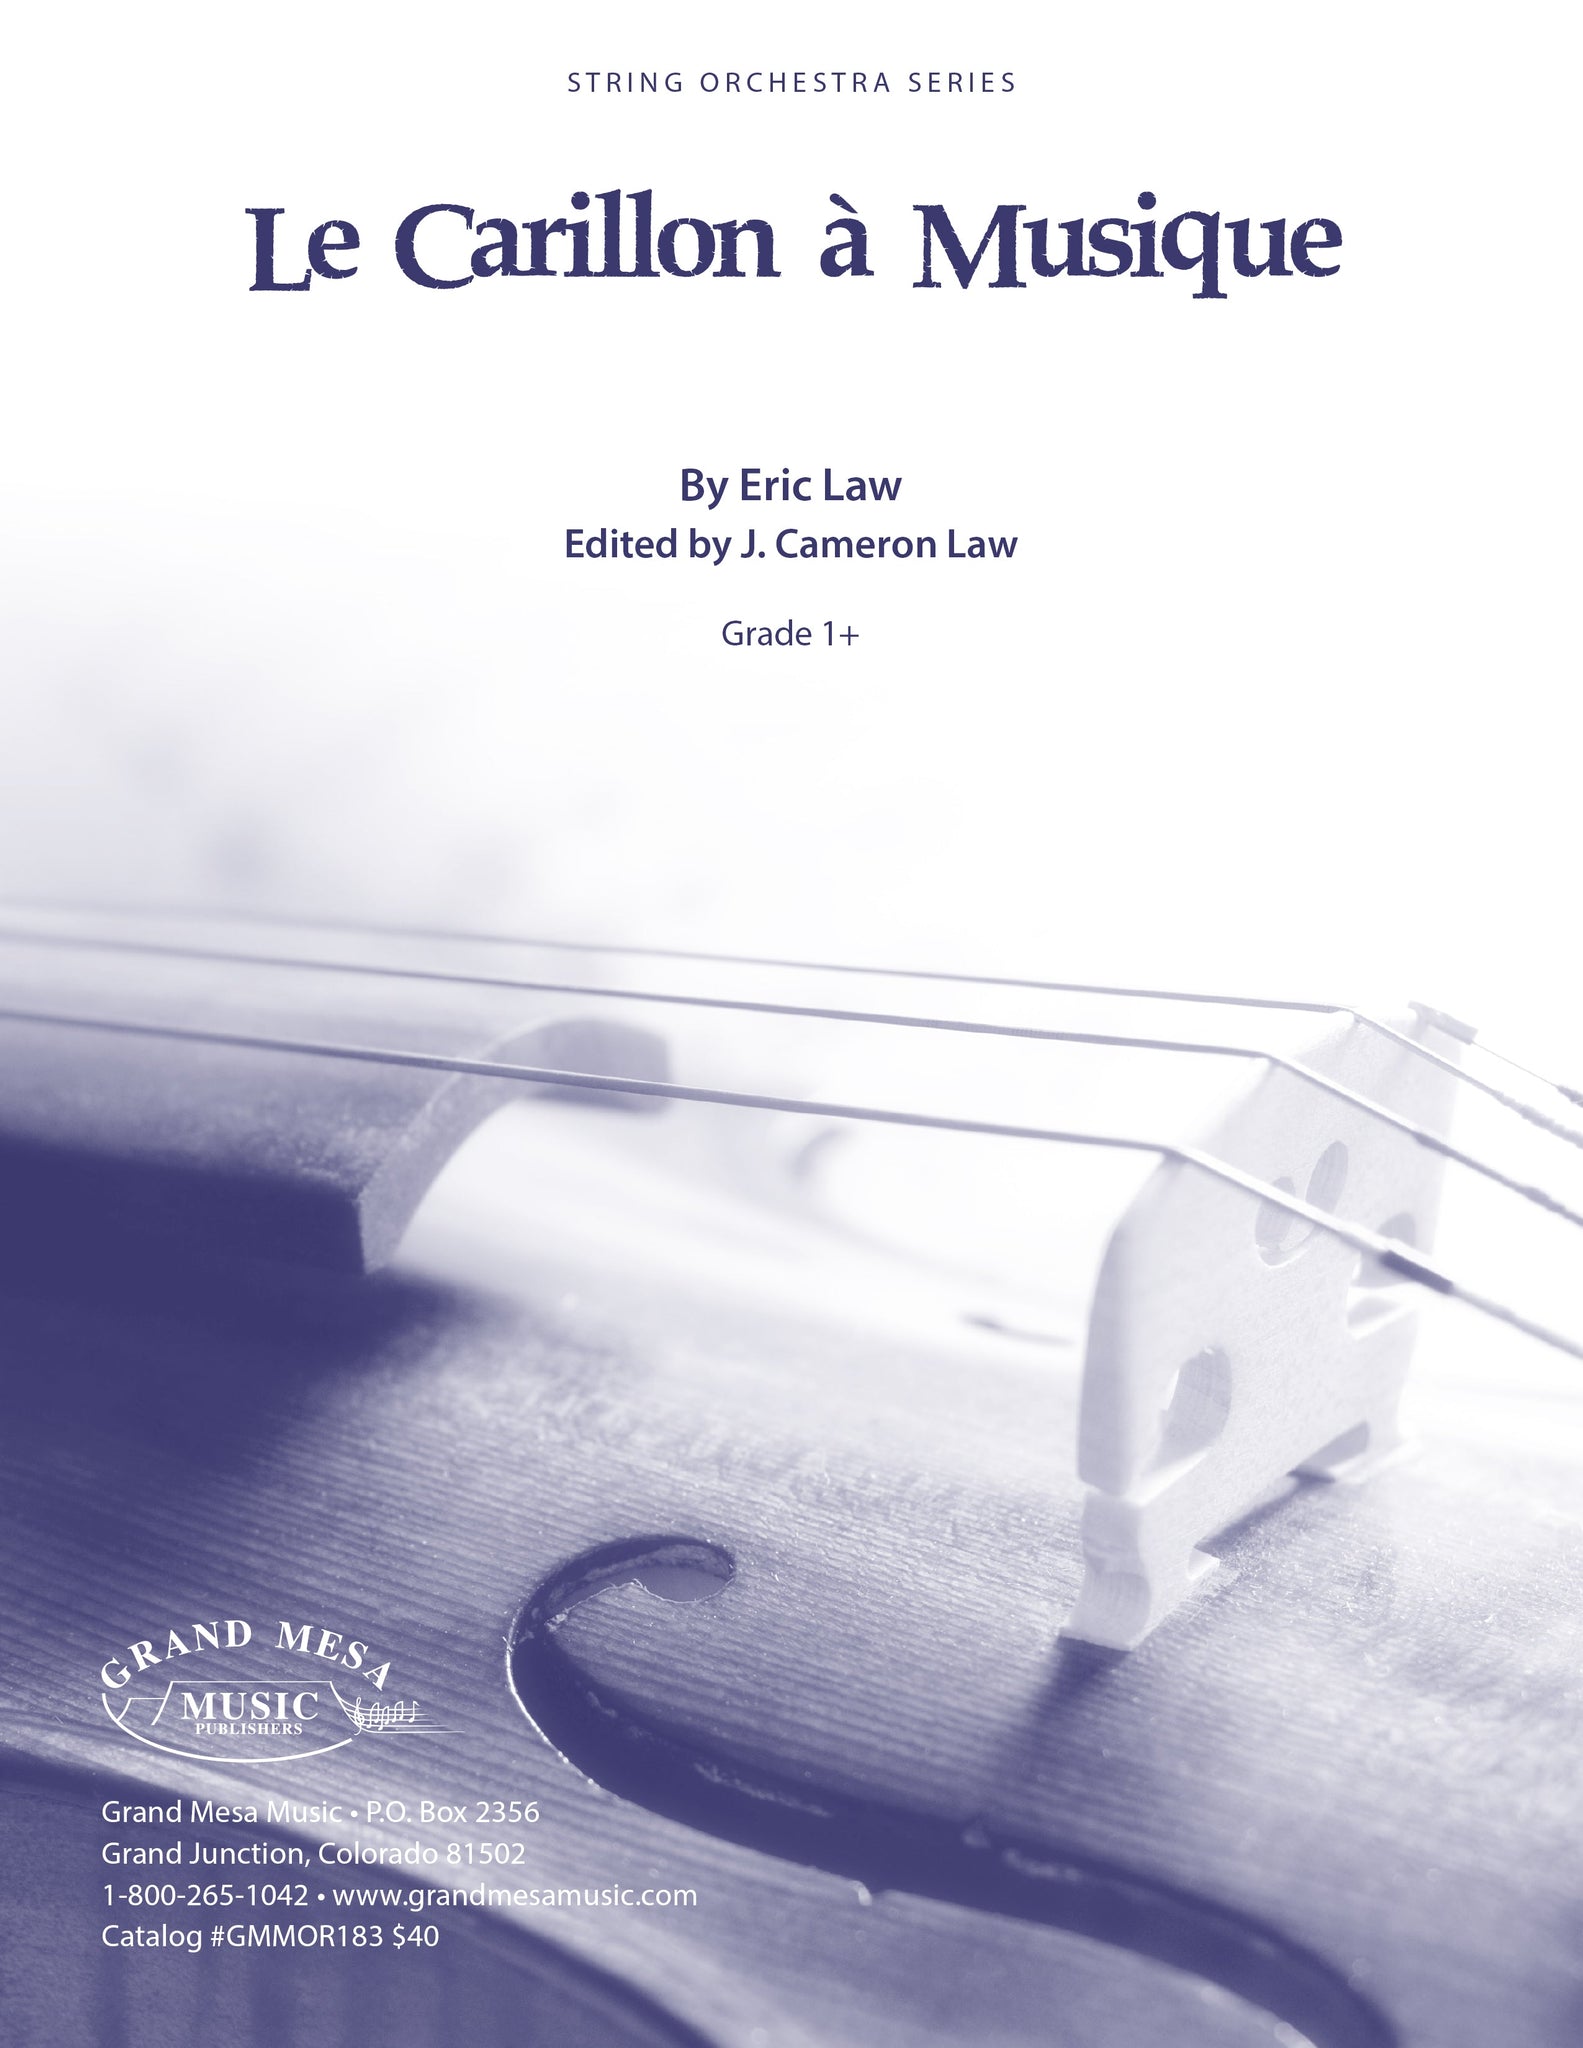 Strings sheet music cover of Le Carillon à Musique, composed by Eric Law.